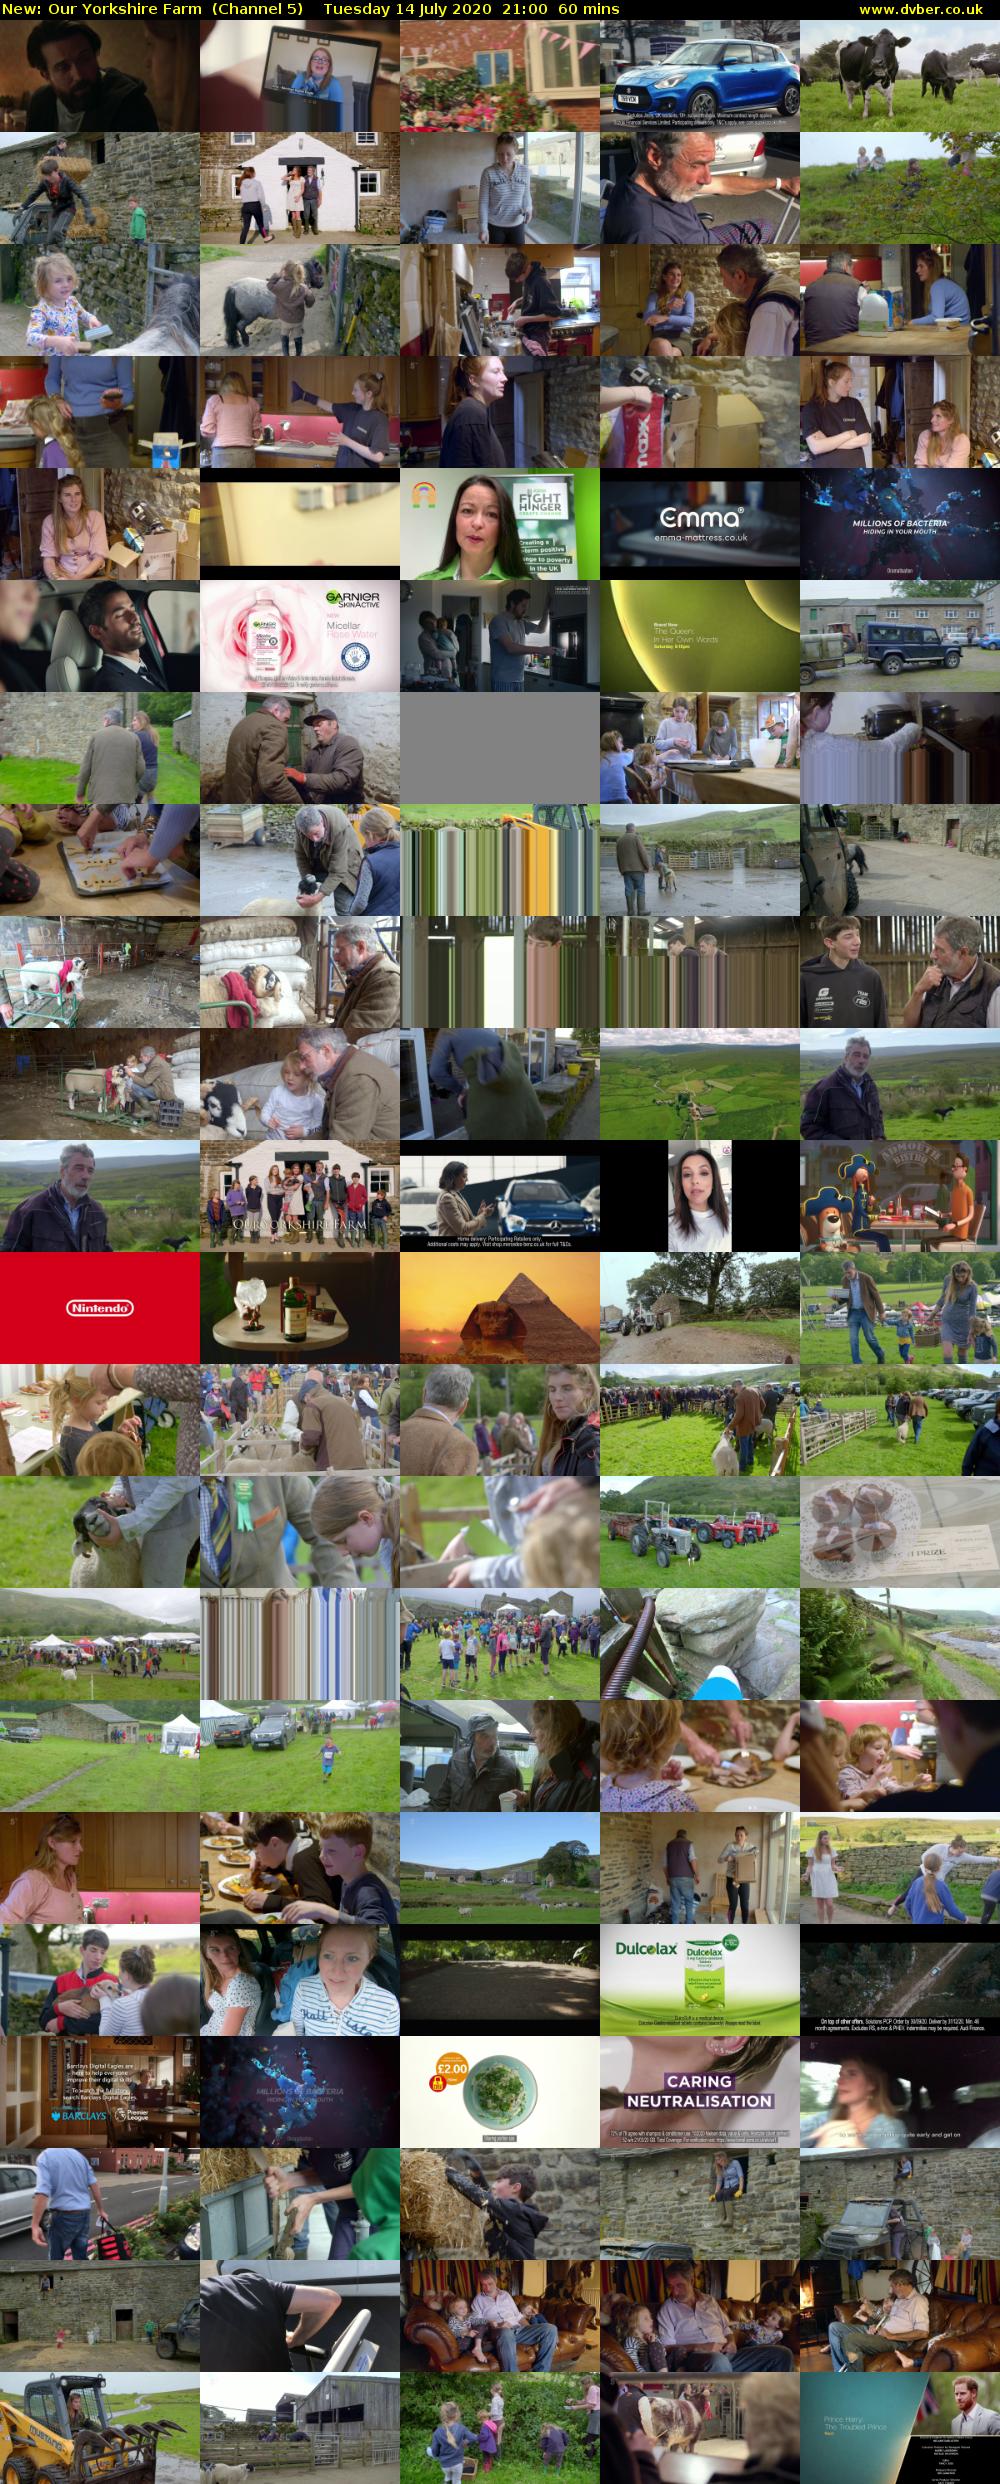 Our Yorkshire Farm (Channel 5) Tuesday 14 July 2020 21:00 - 22:00